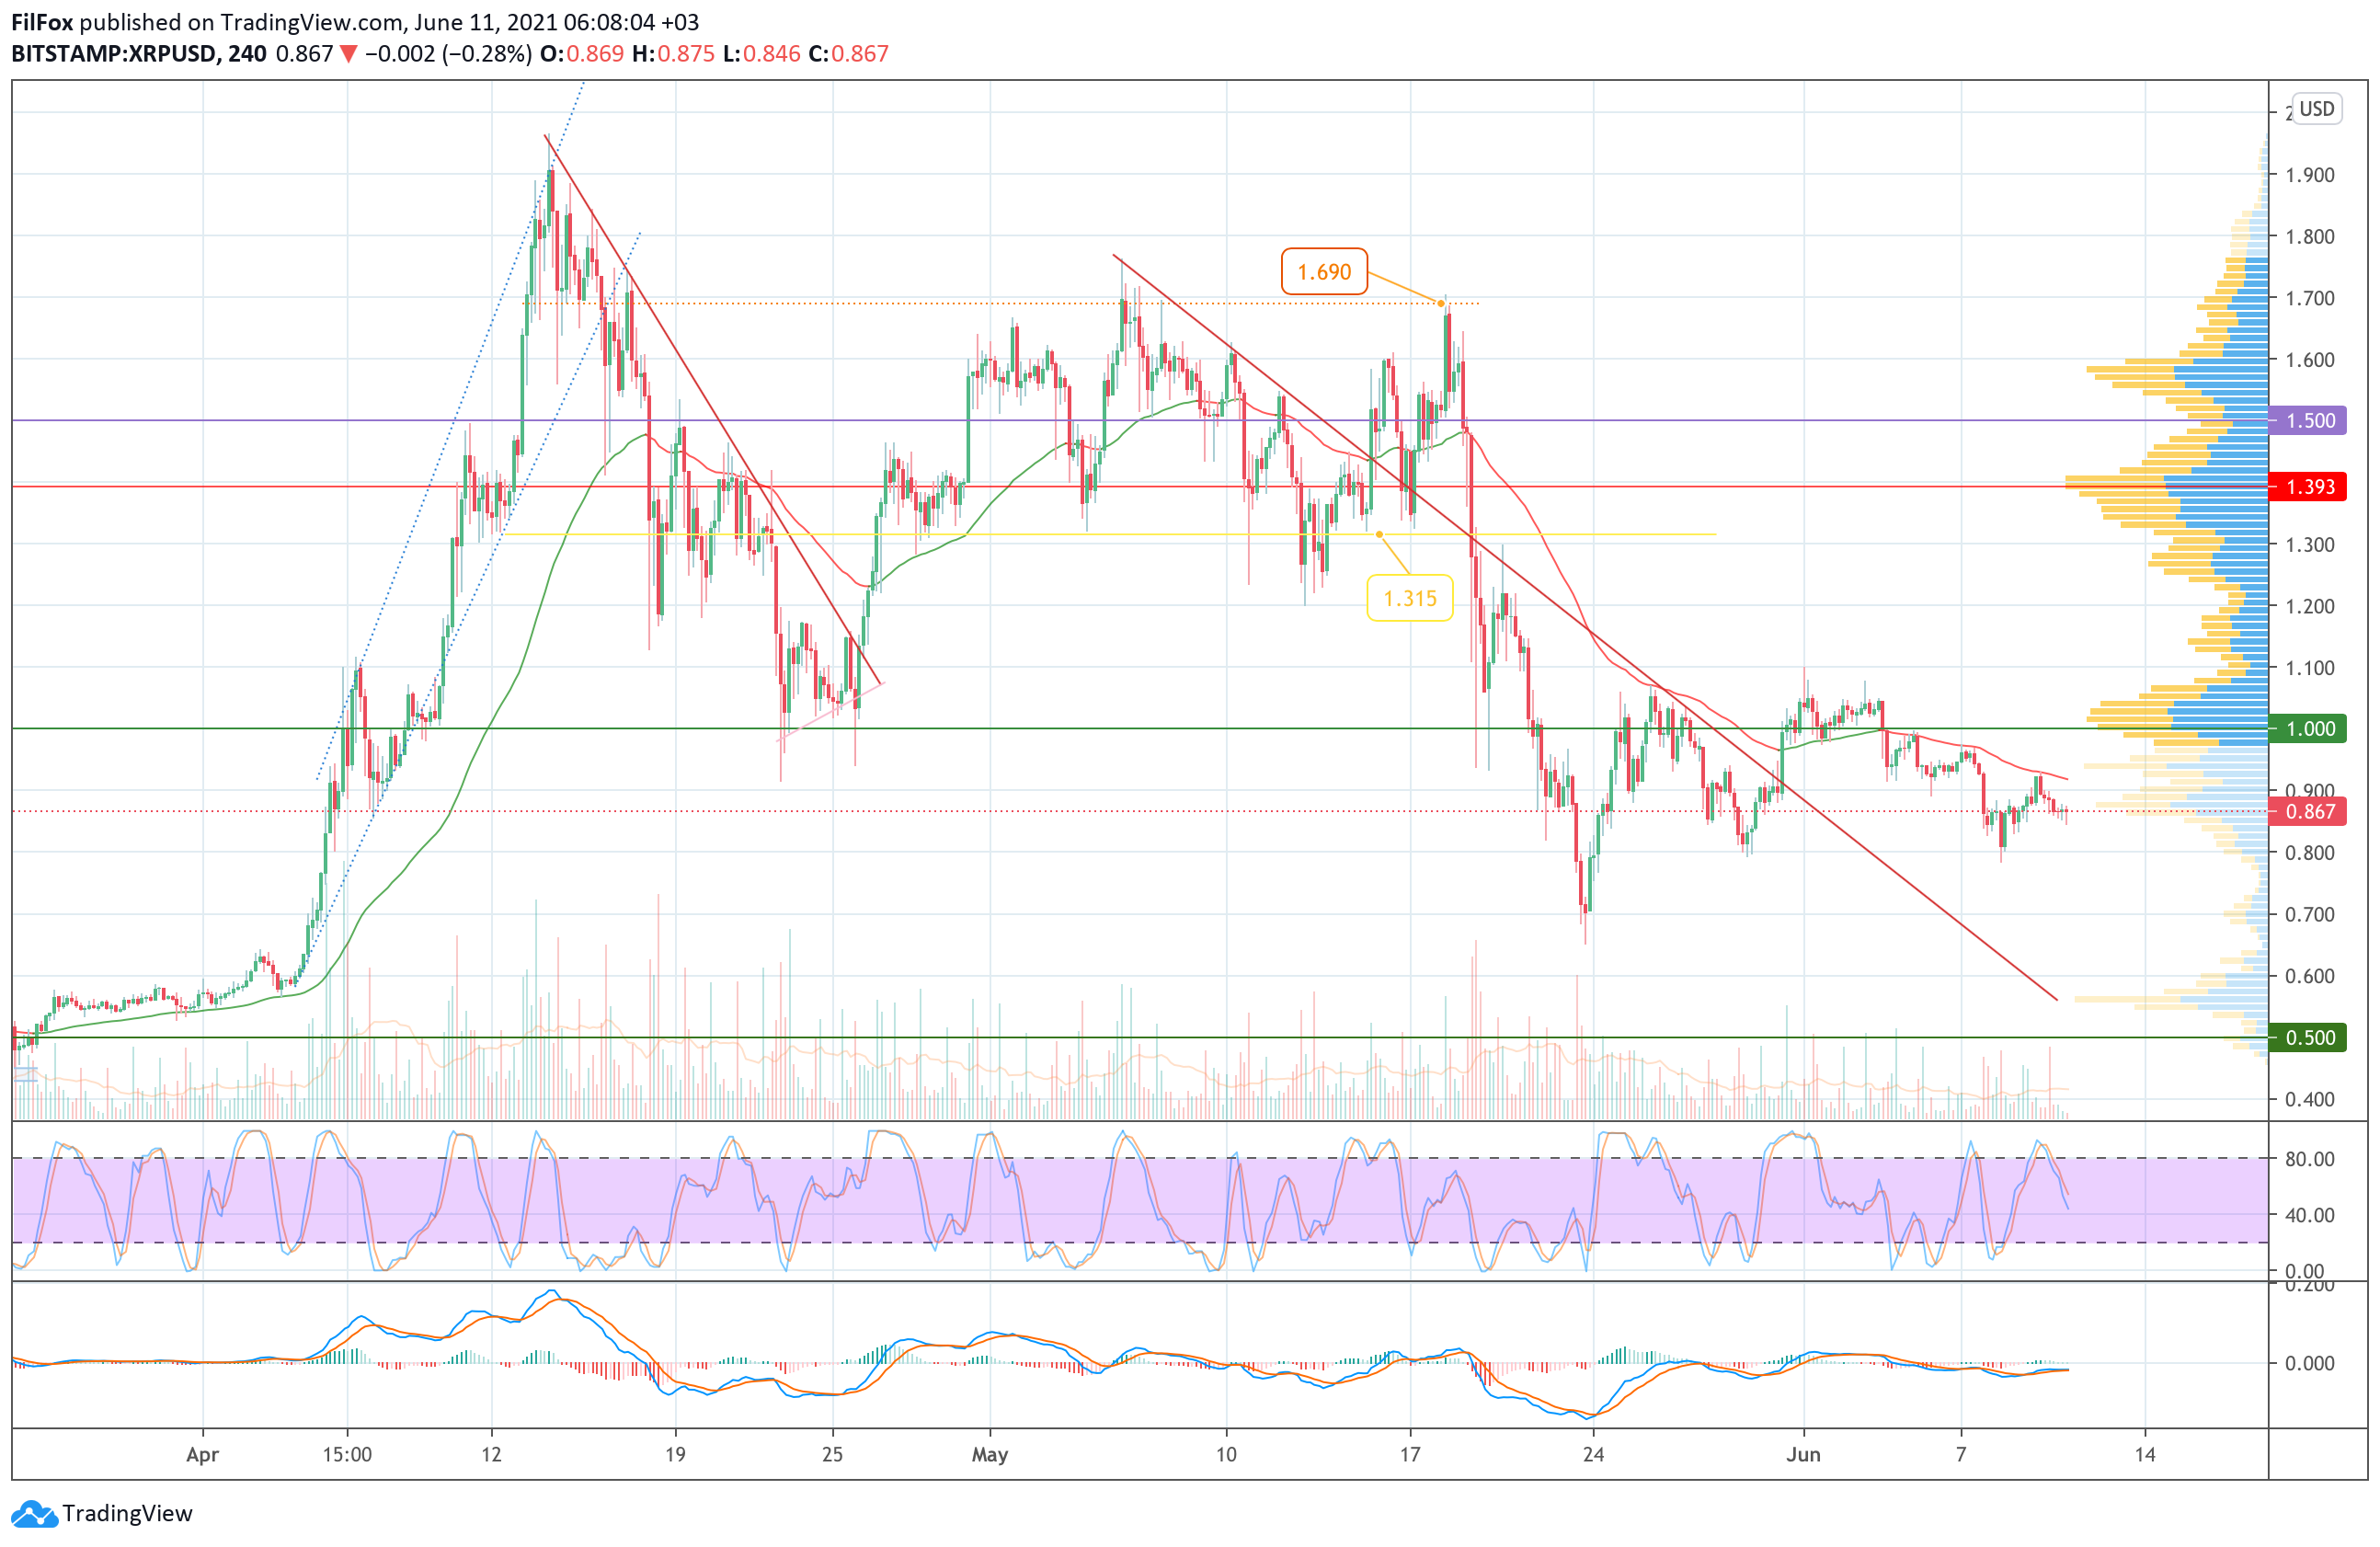 Analysis of the prices of Bitcoin, Ethereum, XRP for 06/11/2021